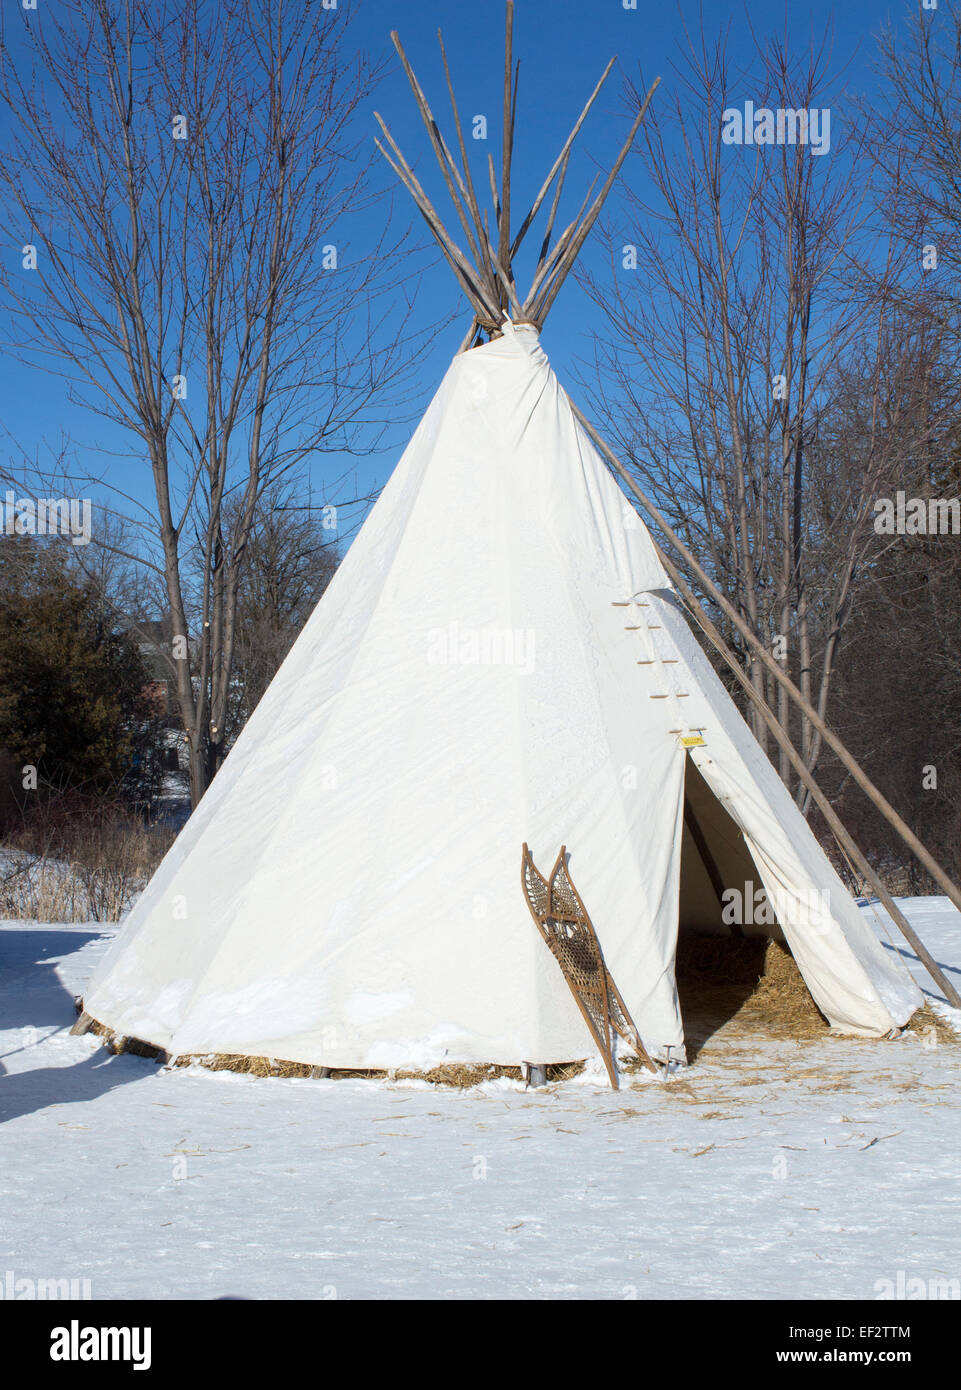 Teepee on display at the Winter Festival in Cannington Ontario Stock Photo